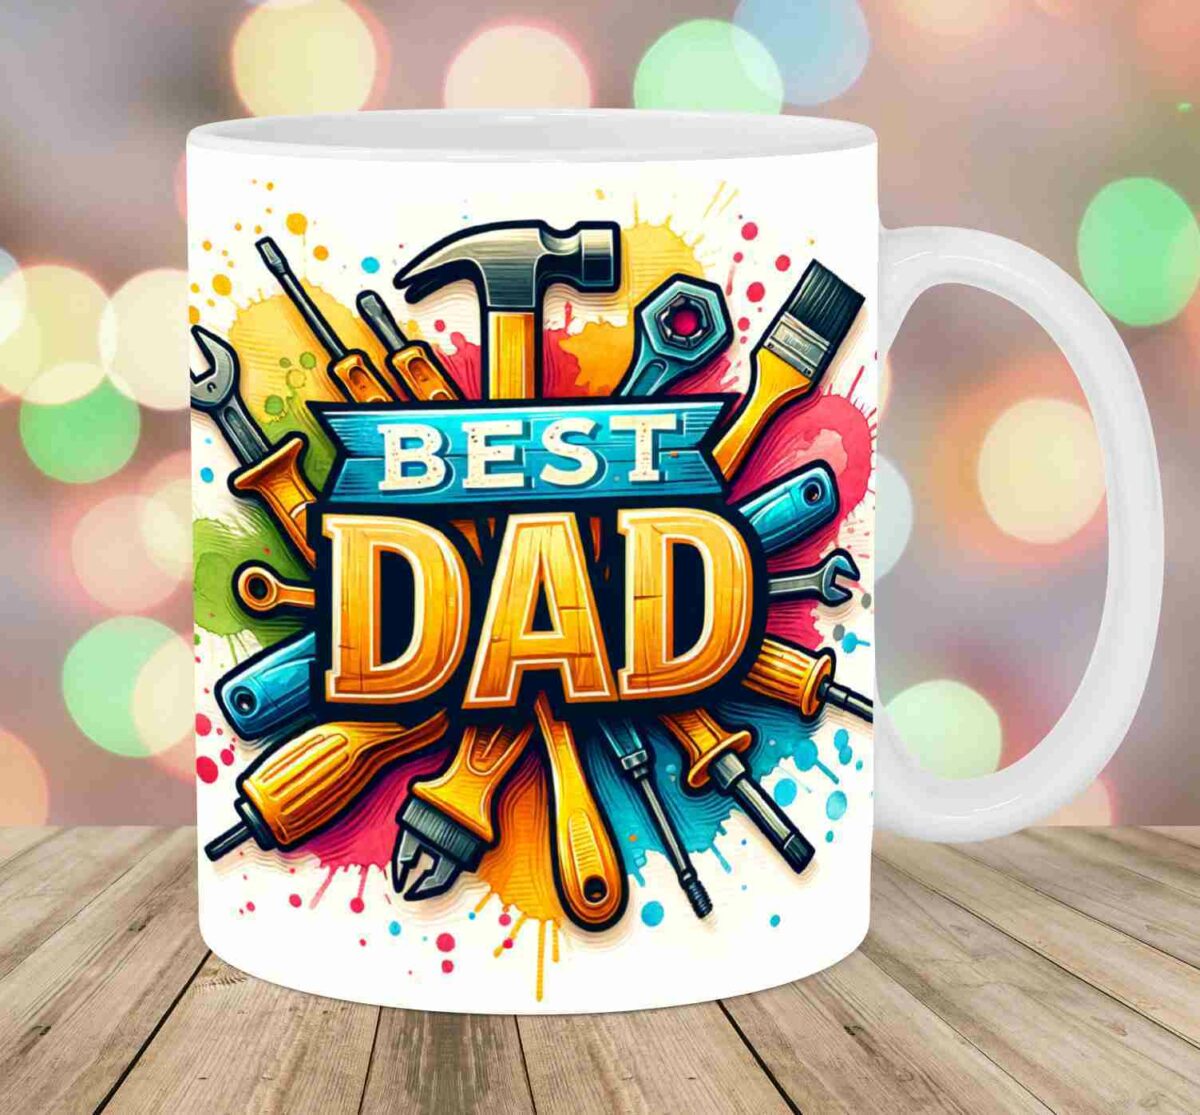 A white coffee mug with a colorful design featuring various tools and the text "Best Dad" prominently displayed in the center.